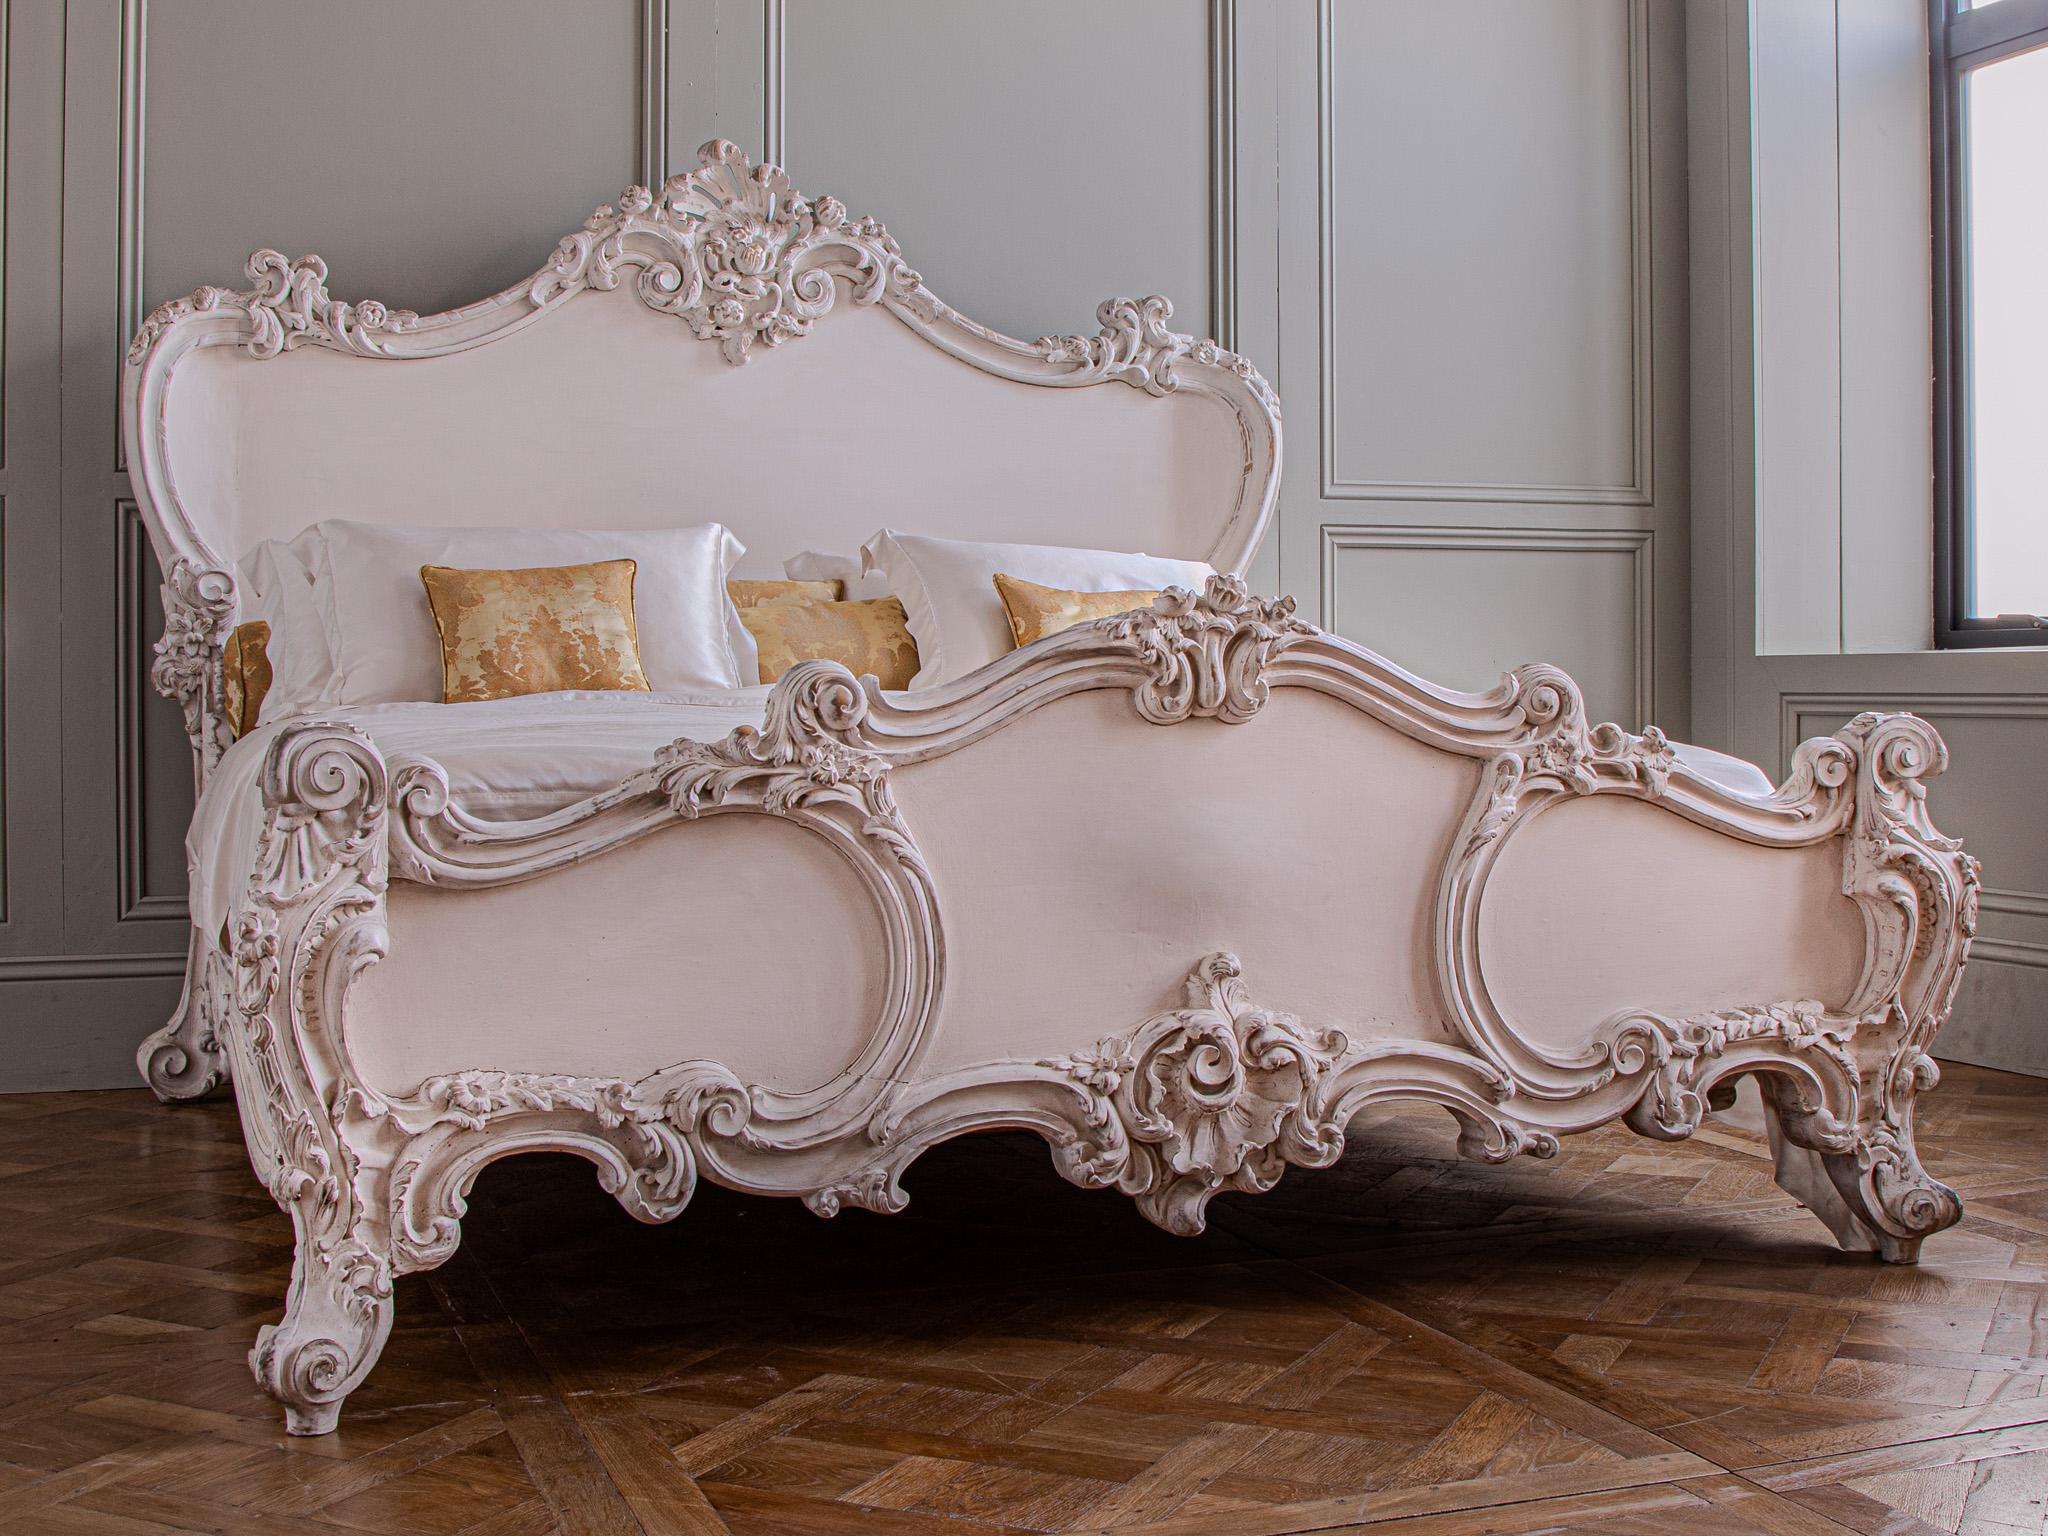 Hand-Carved A French Rococo Style 'Cherub' Bed Painted In White Gesso By La Maison London For Sale